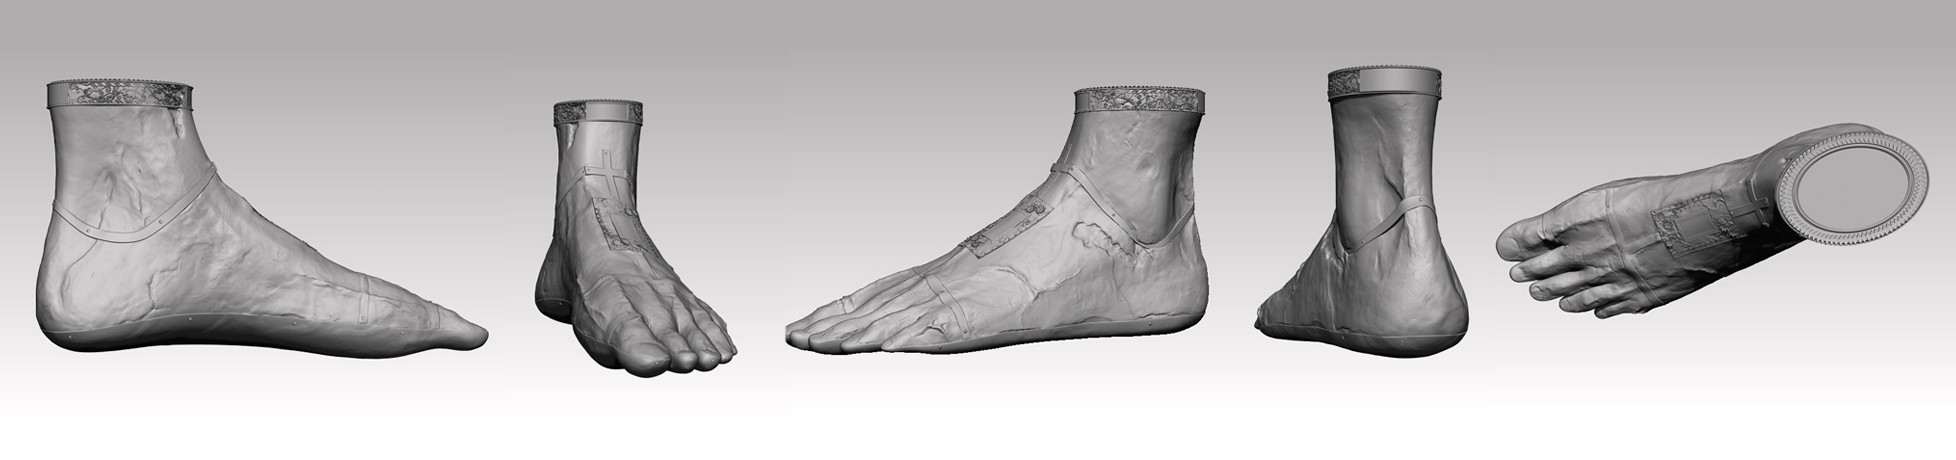 Nimue Foot High Poly